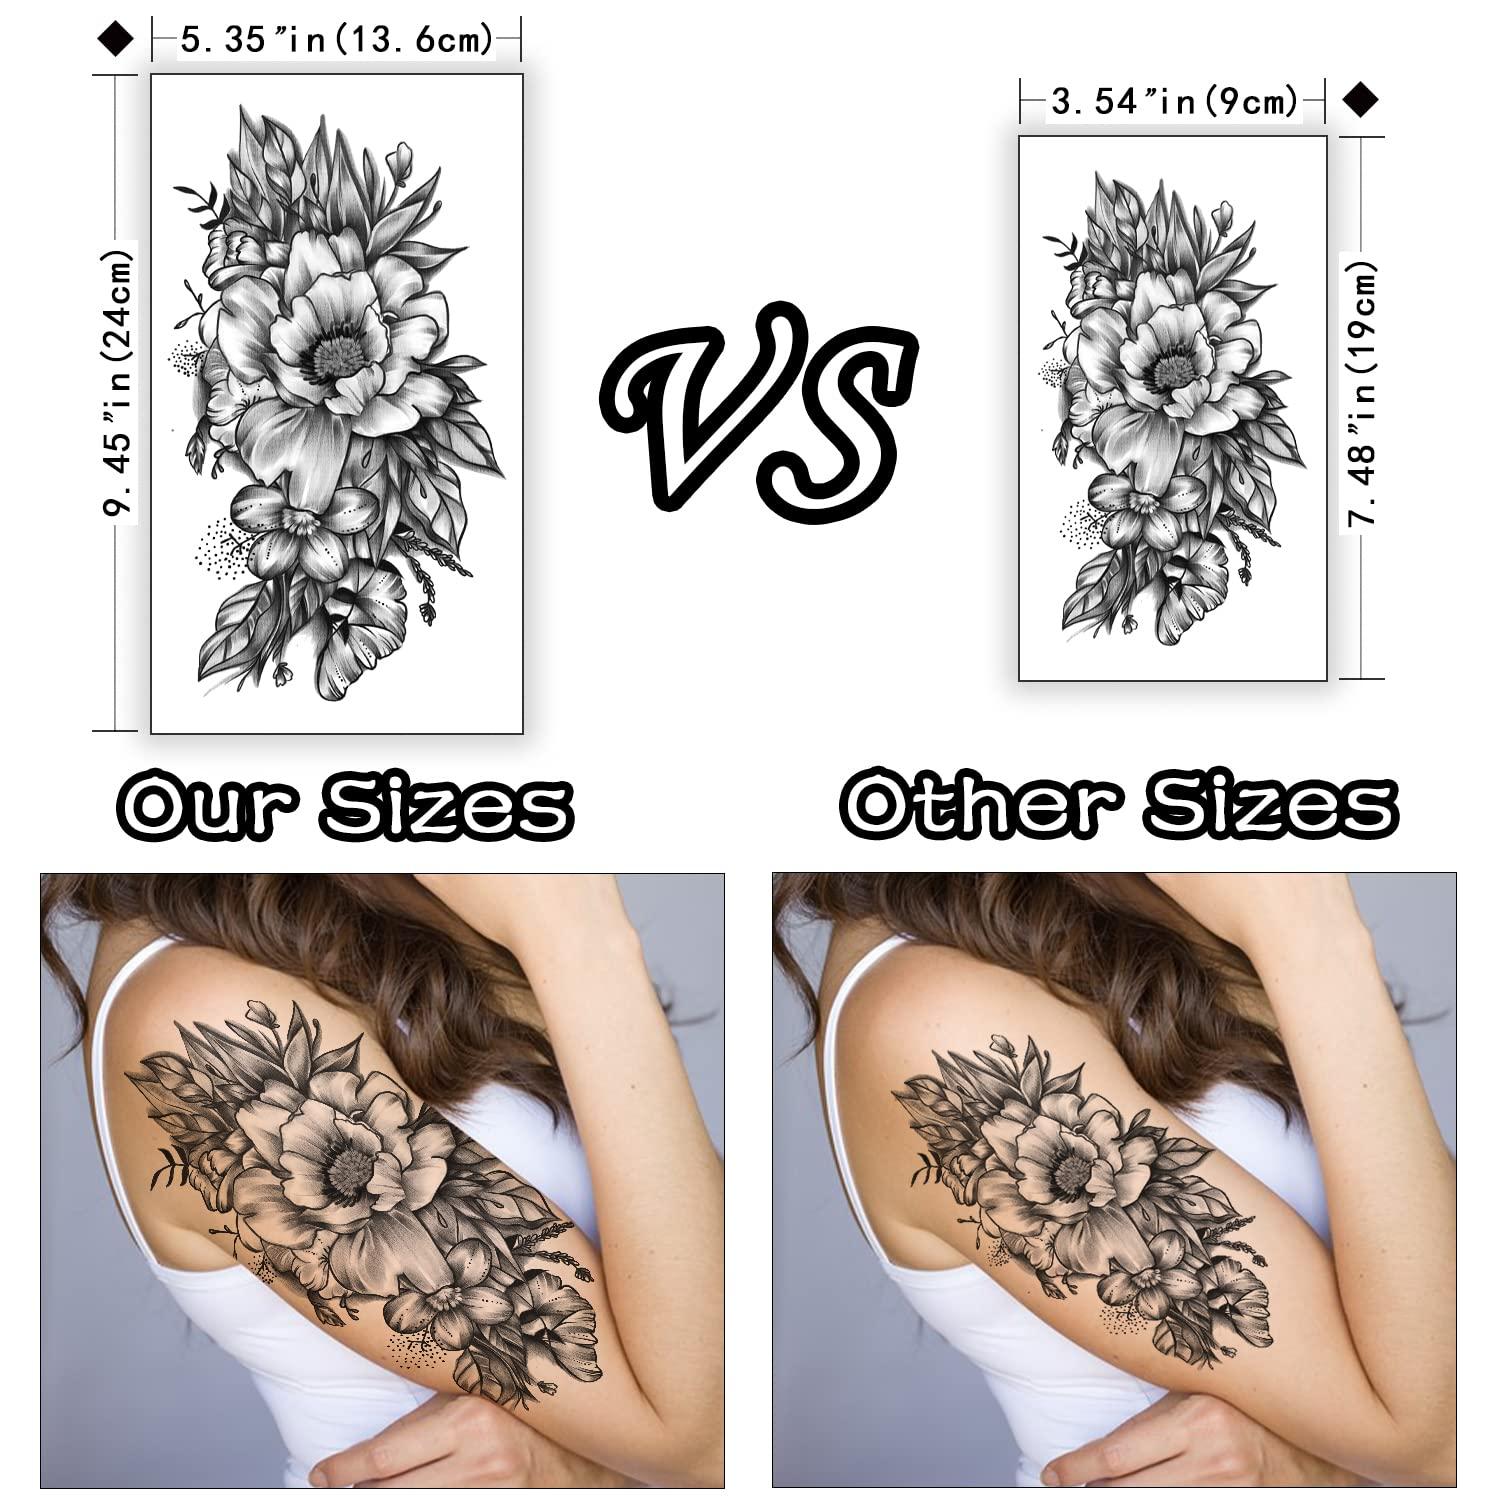 Waterproof Temporary Transfer Tattoo Stickers Animal Dragon Snake Lion  Tattoo Stickers Men And Women Black And White Tattoos - Temporary Tattoos -  AliExpress